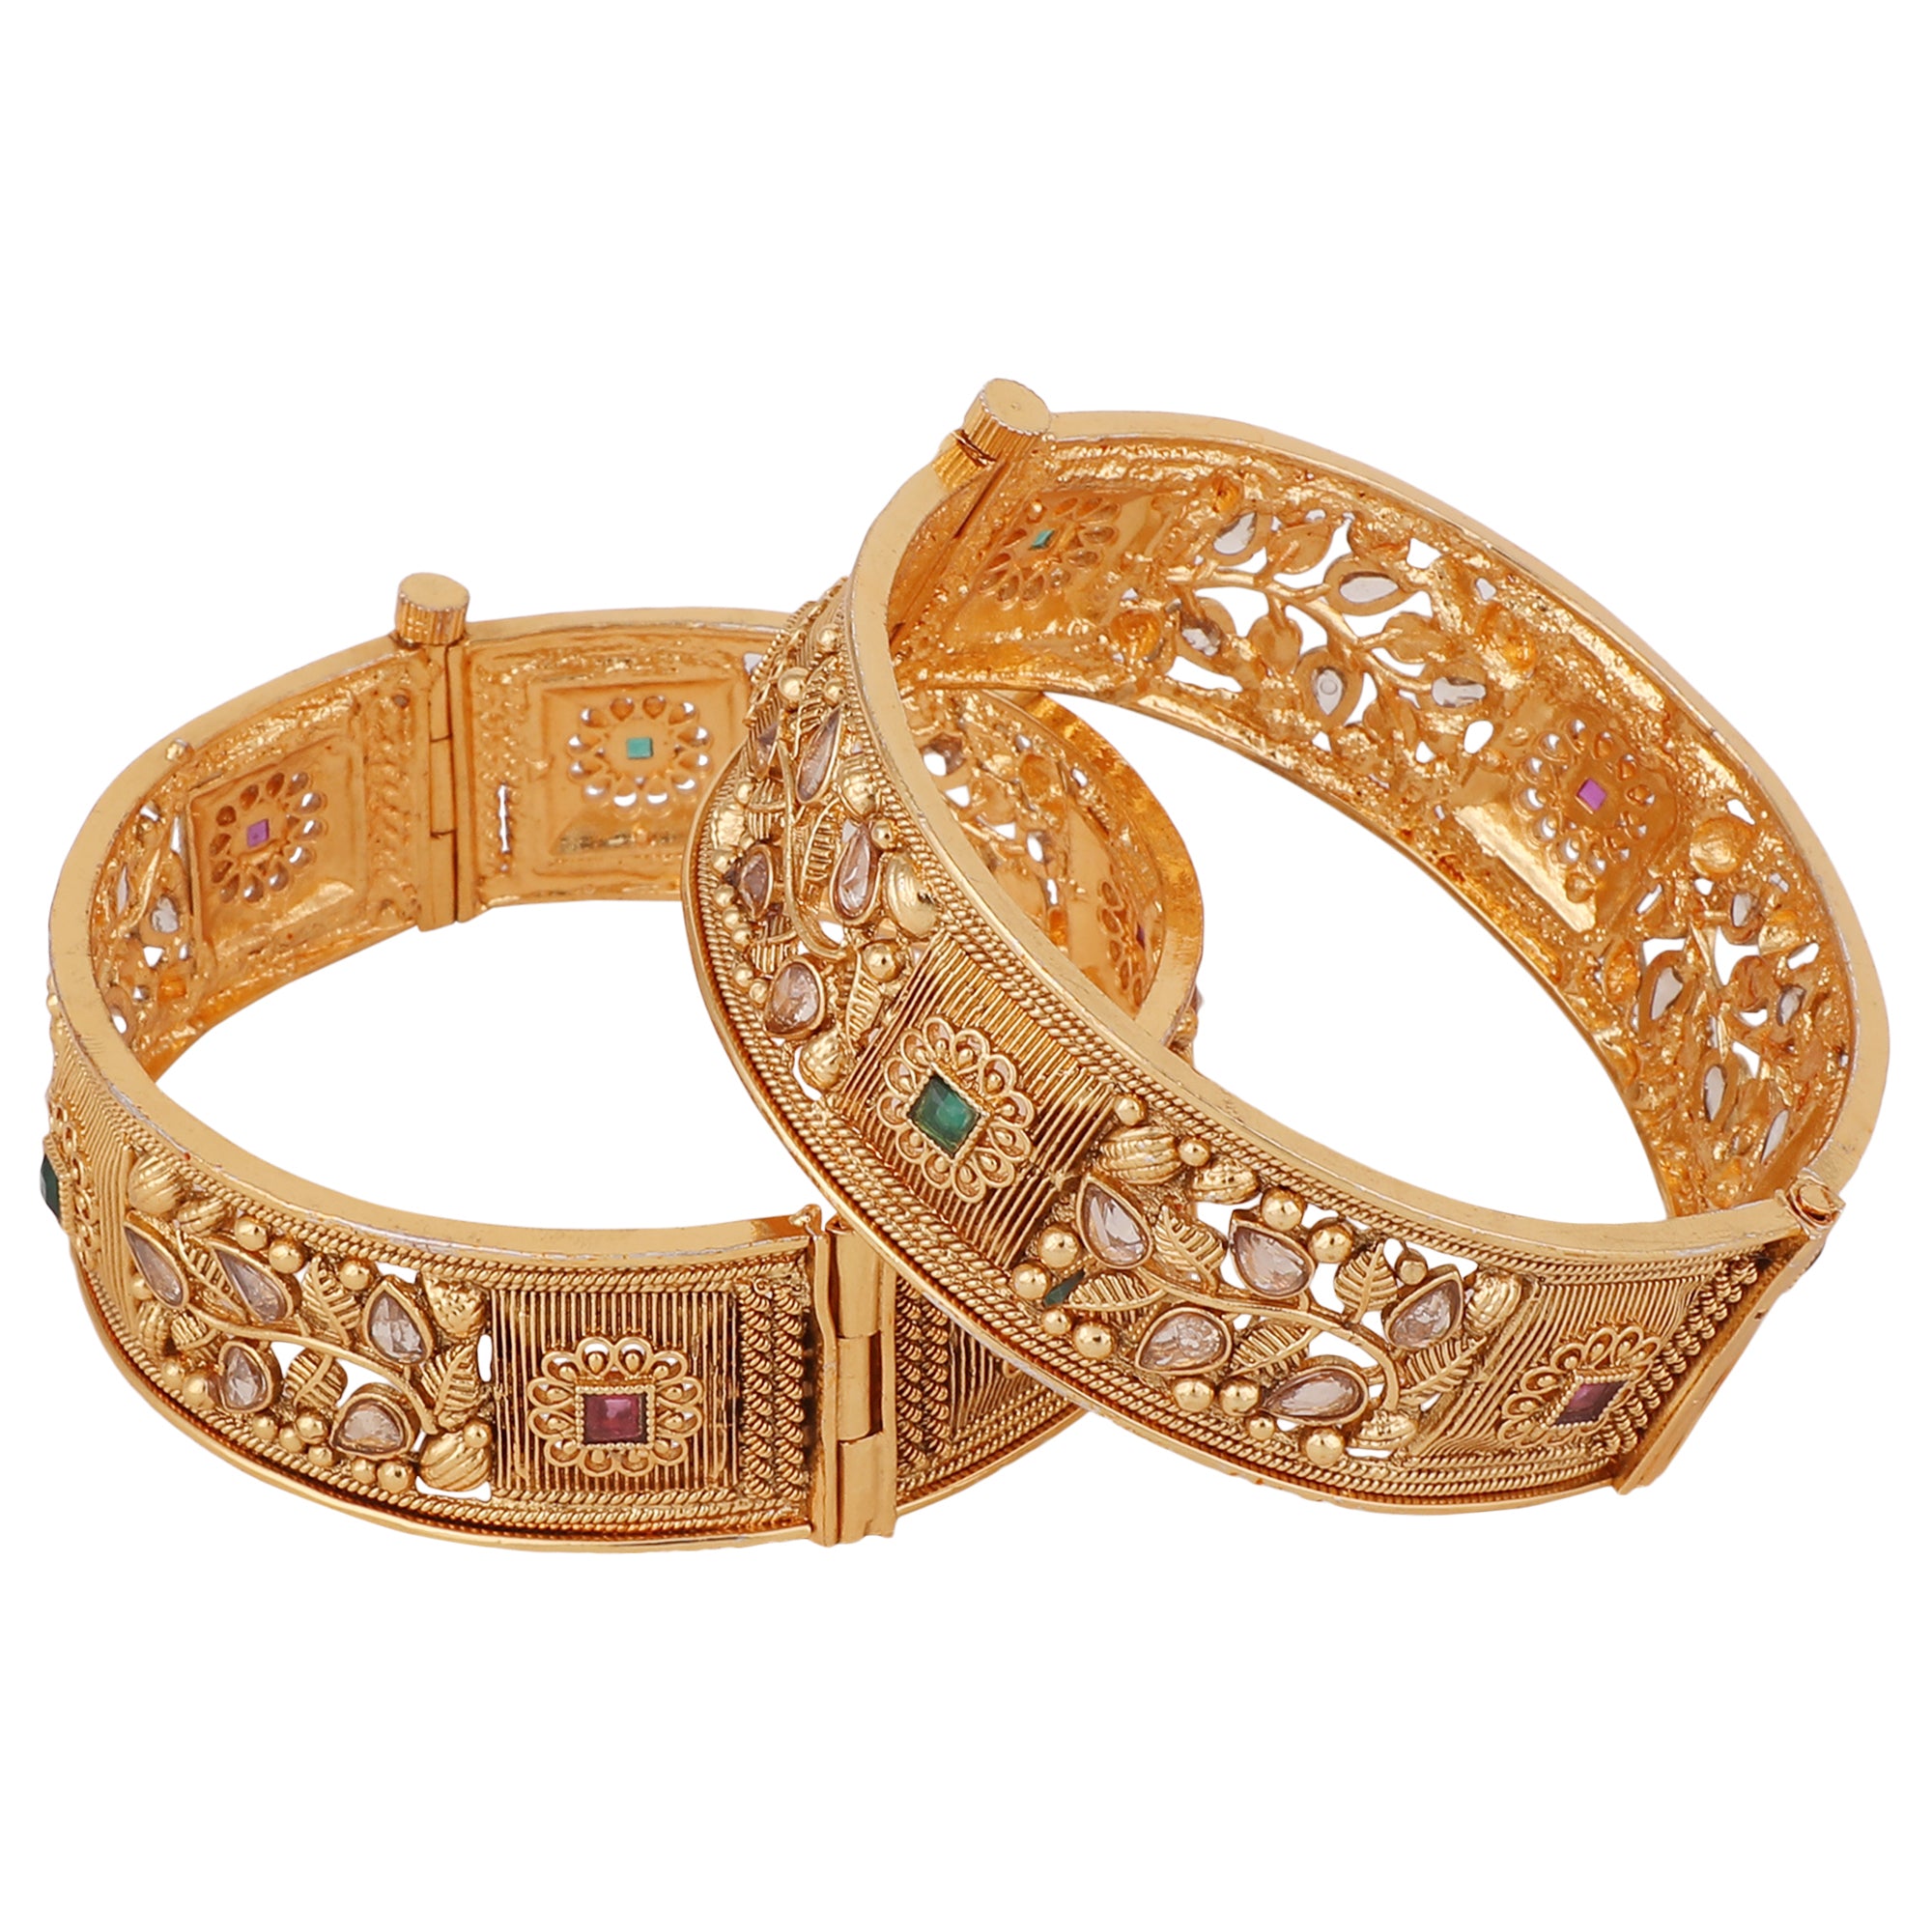 Women's Set Of 2 Gold-Plated Red & Green Stone-Studded Antique Bangles - Anikas Creation